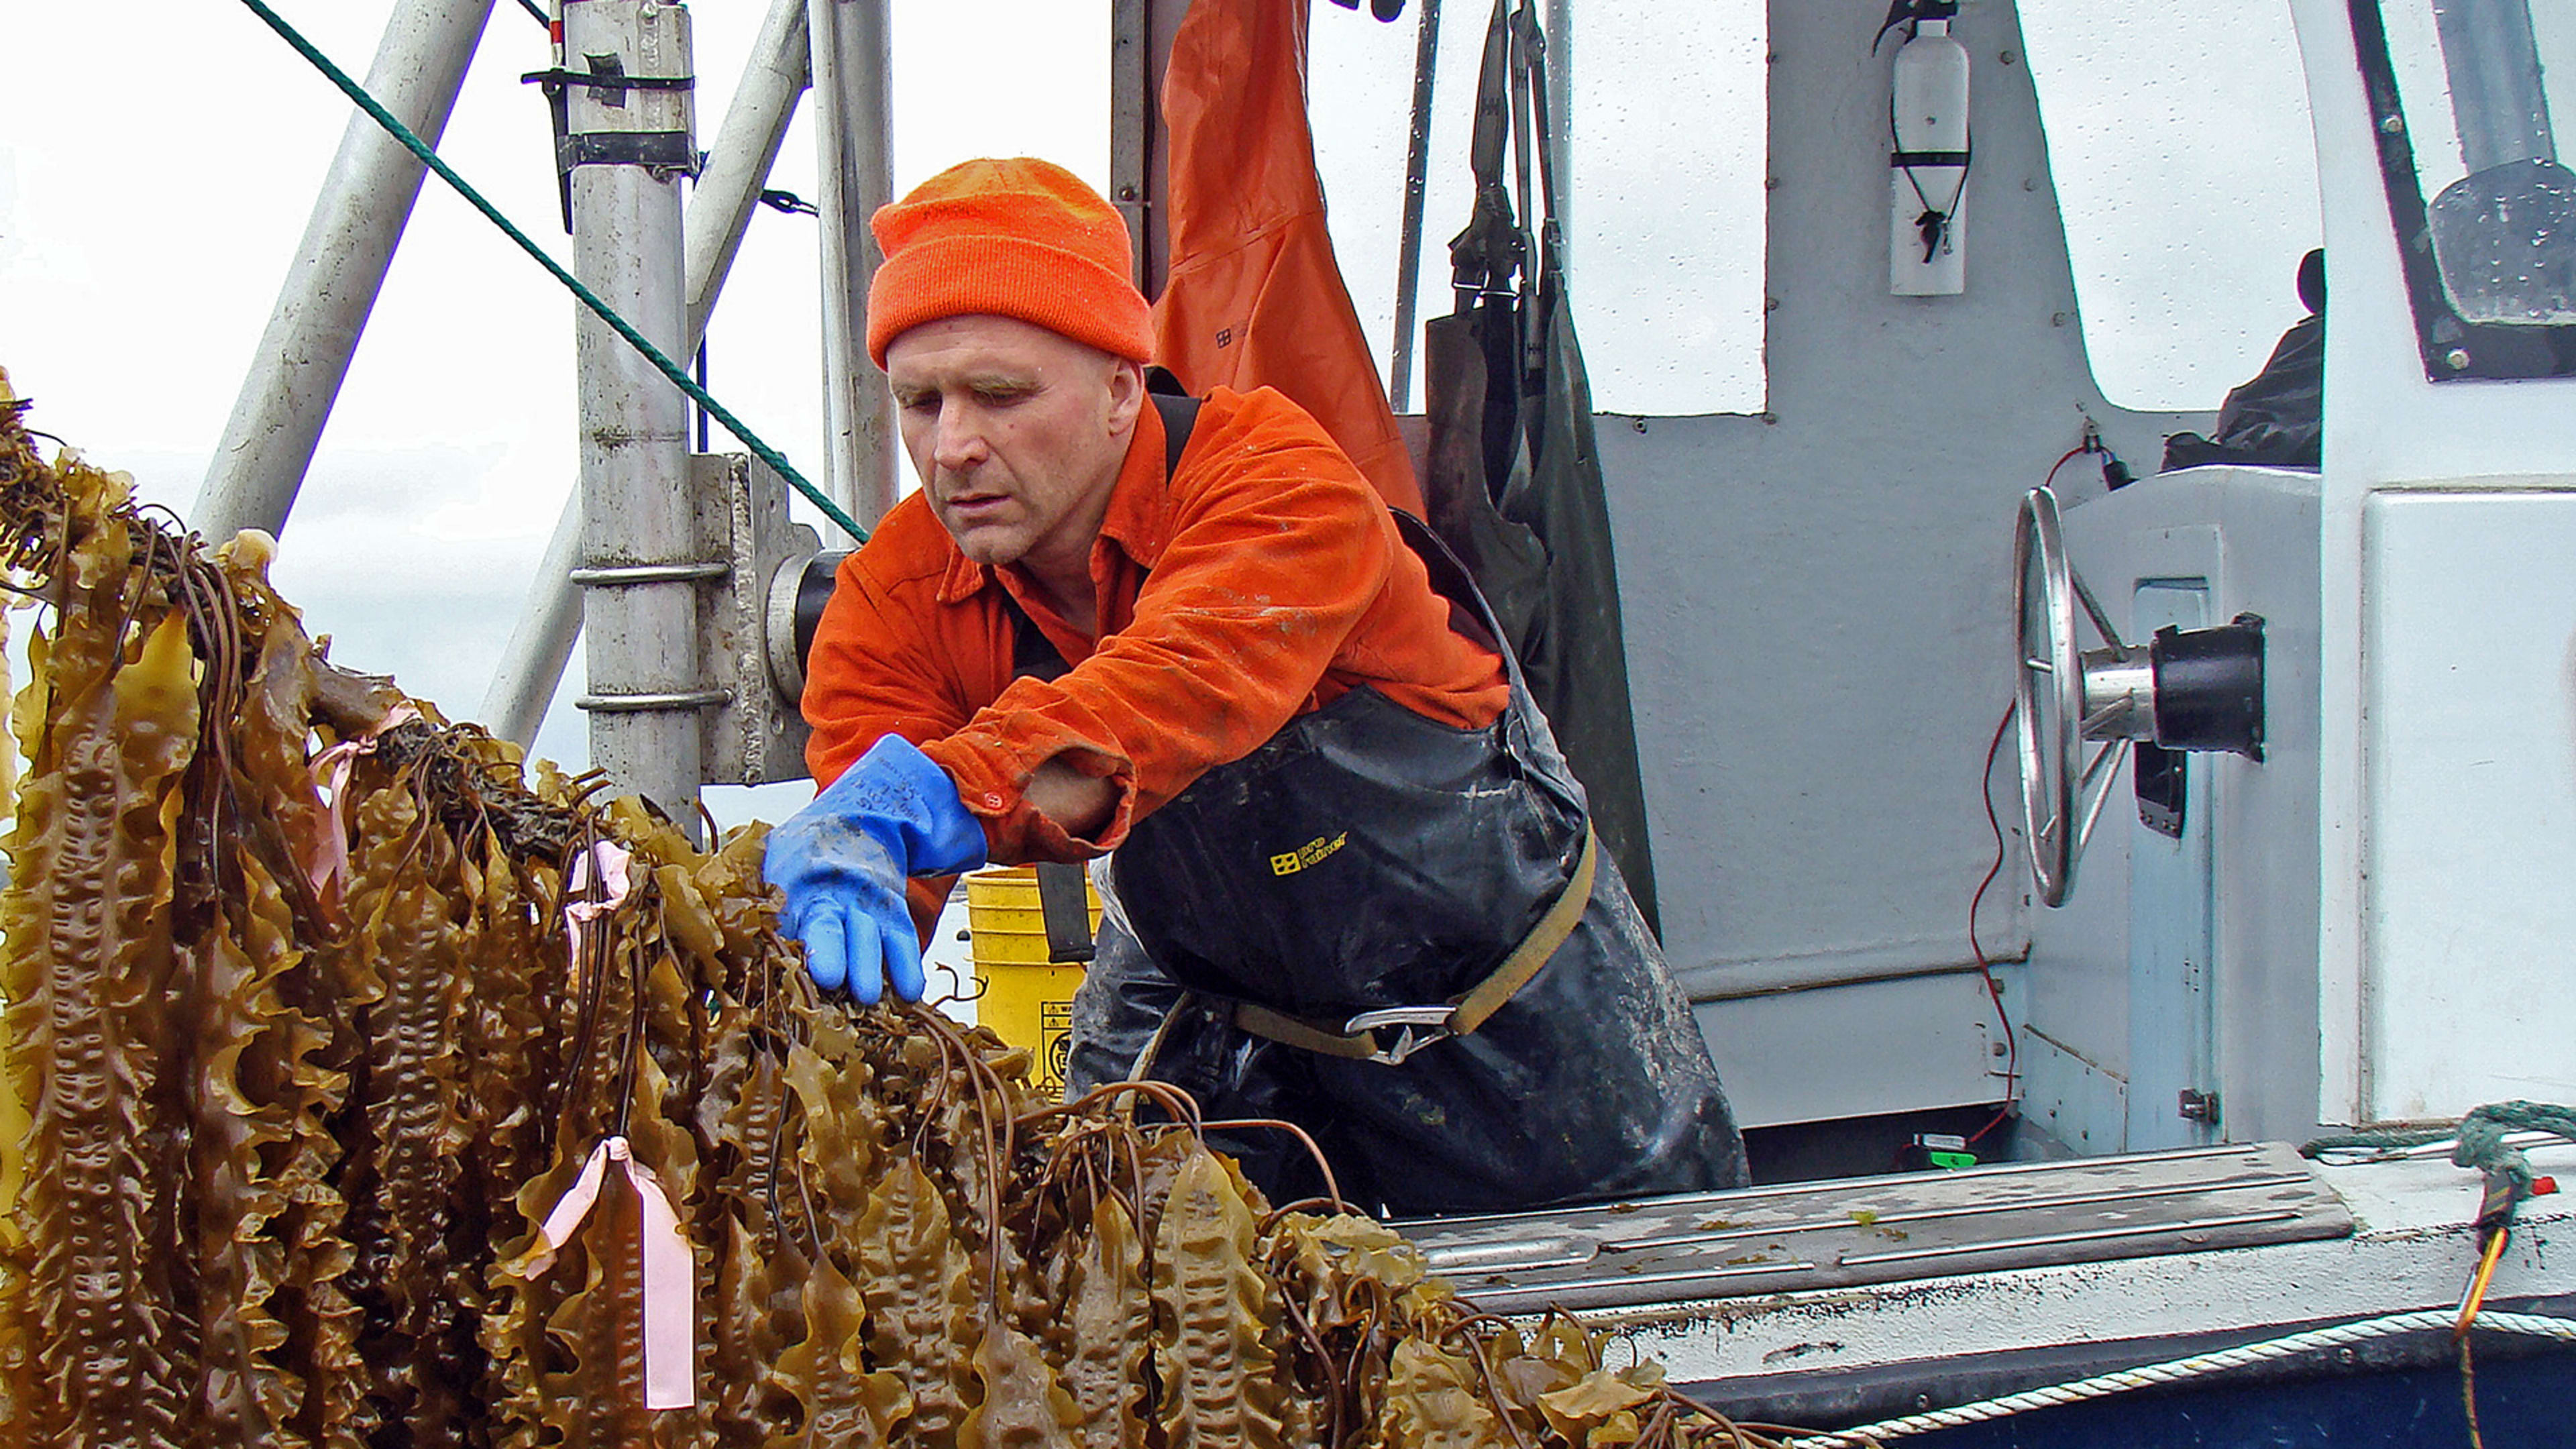 Vertical Seaweed Gardens Are The New Way To Feed Ourselves From The Overfished Oceans